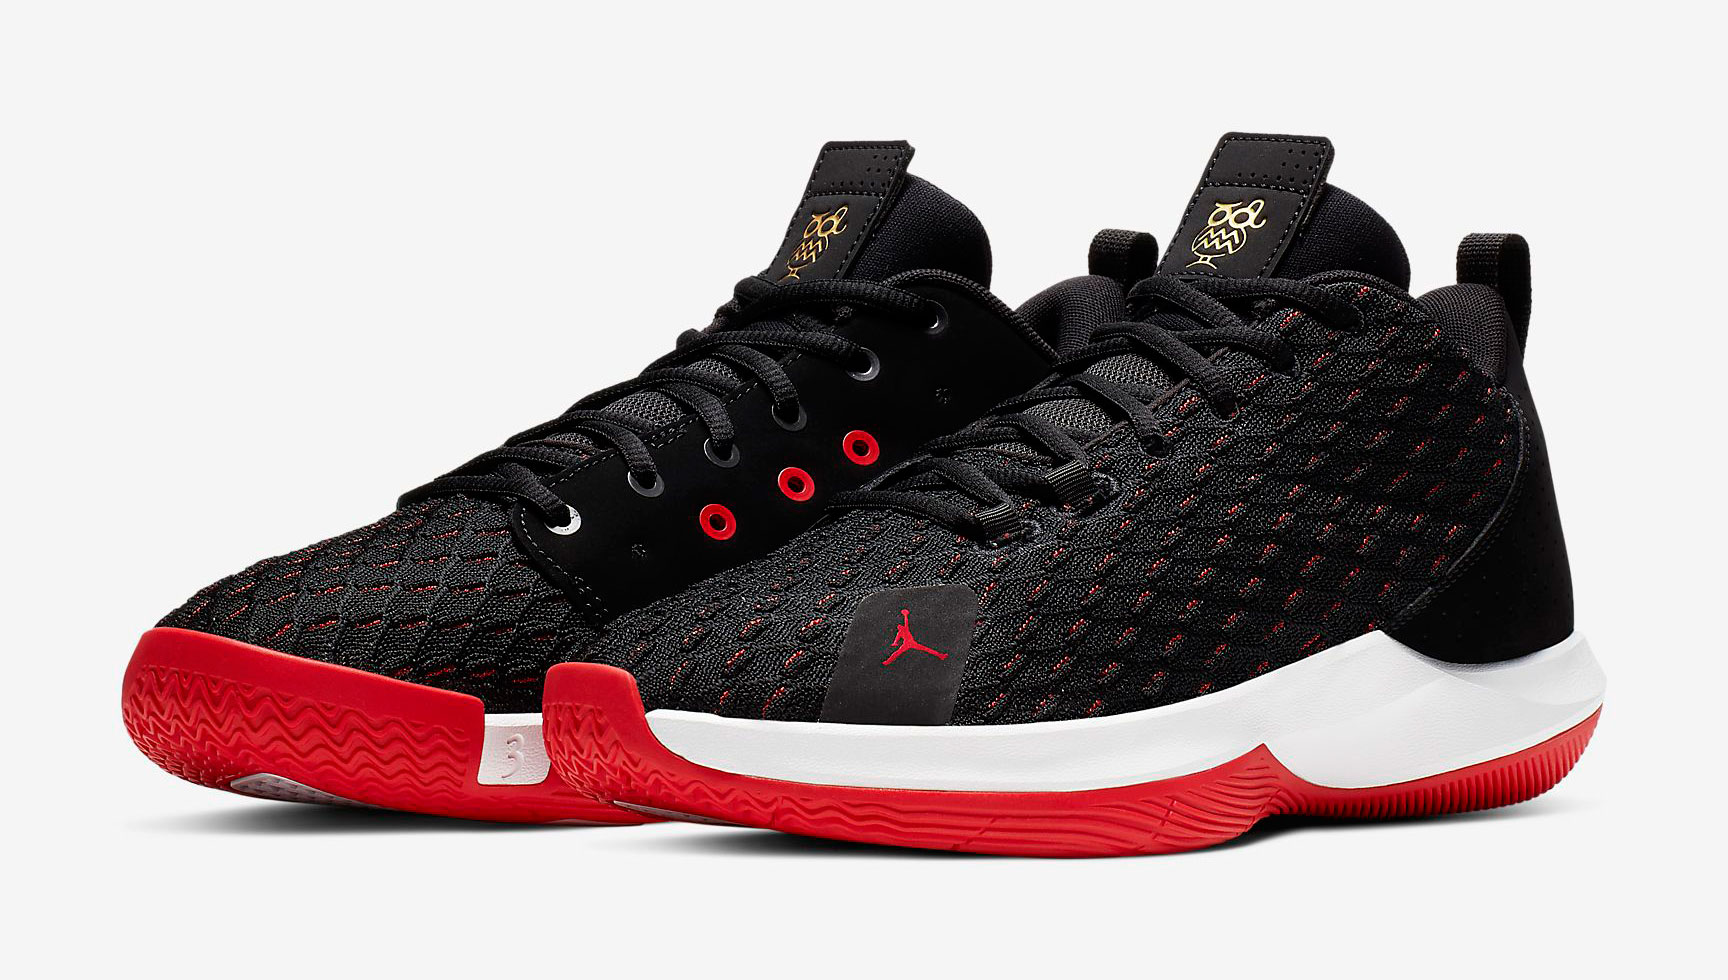 jordan-cp3-12-black-red-unfinished-business-release-date-where-to-buy